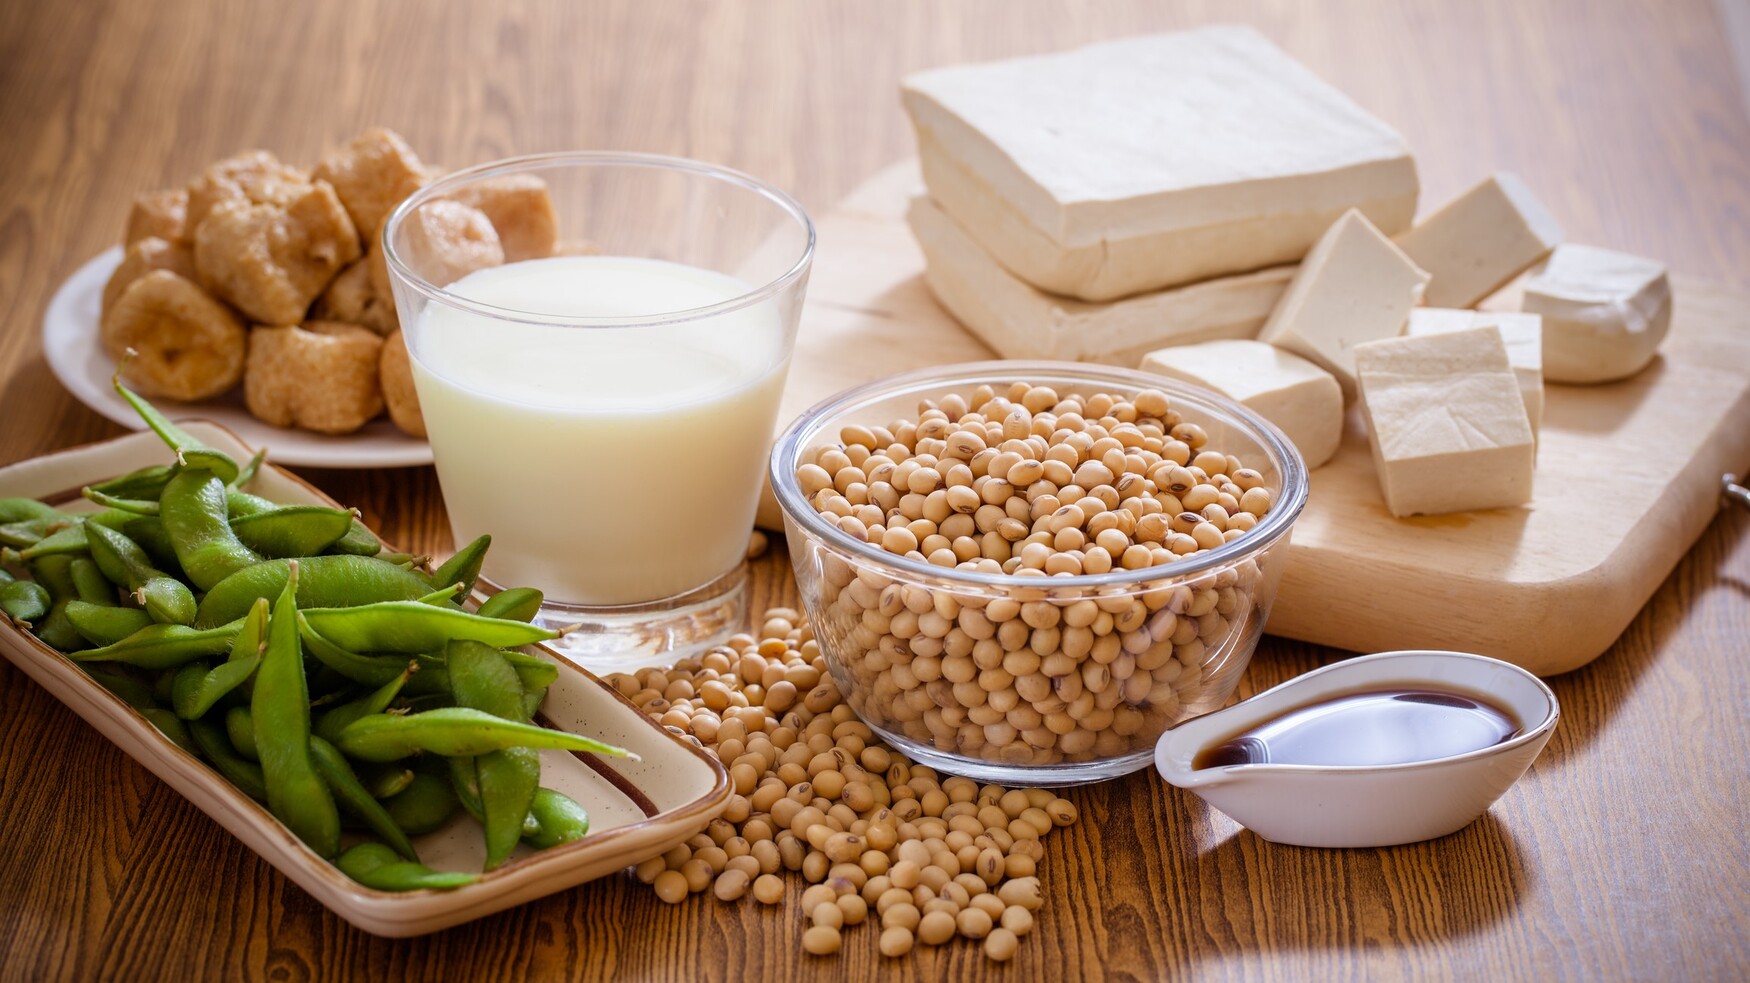 Soy food products; soy beans, tofu, soy milk, edamame